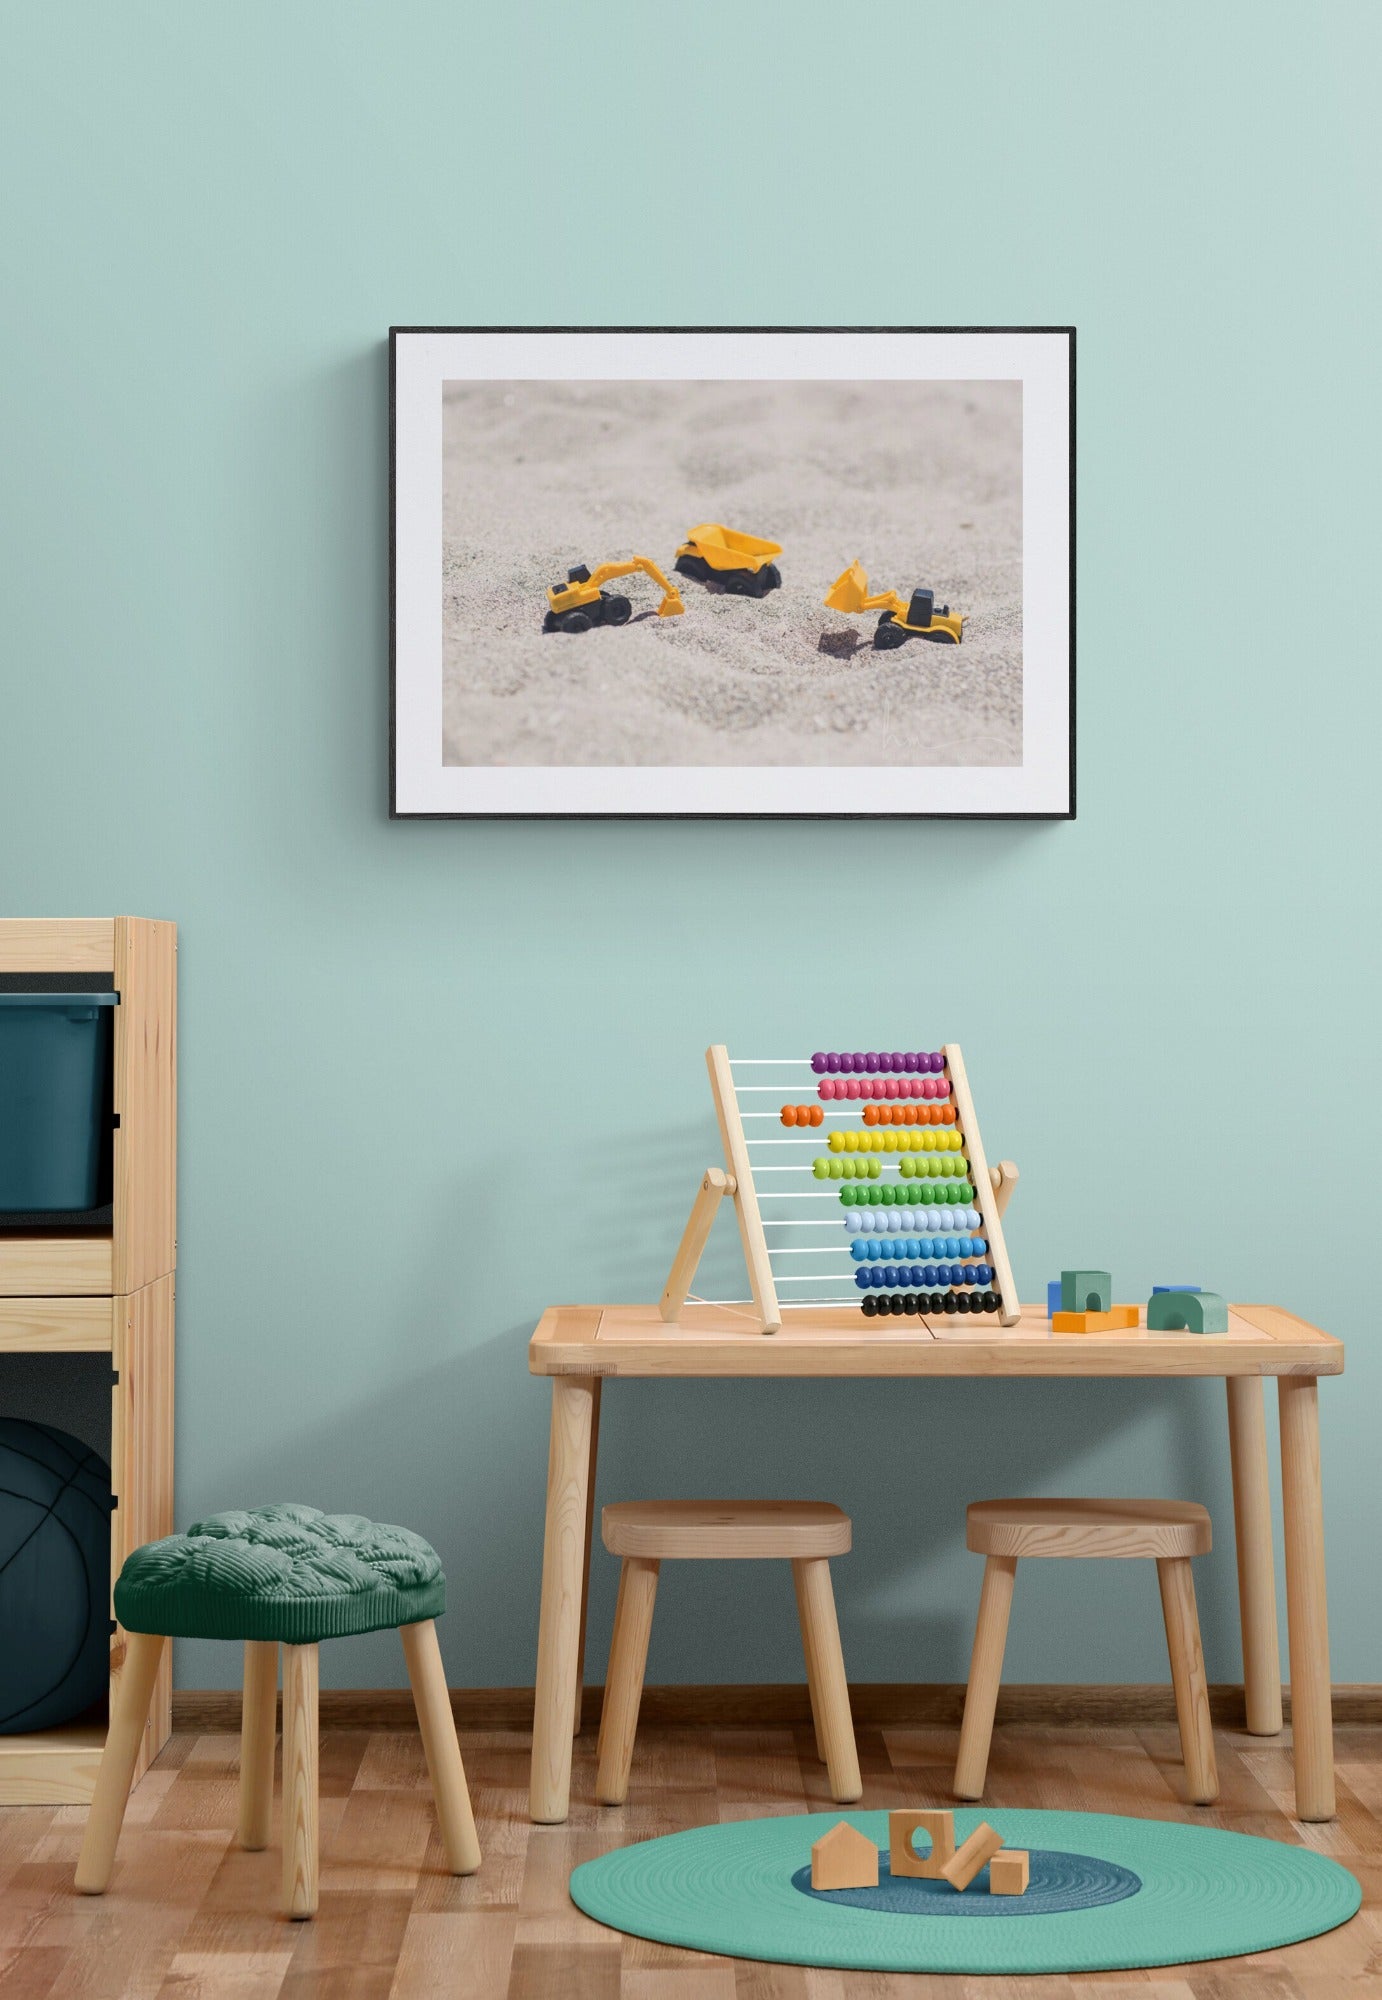 Construction site whimsical photograph print as wall art in a playroom